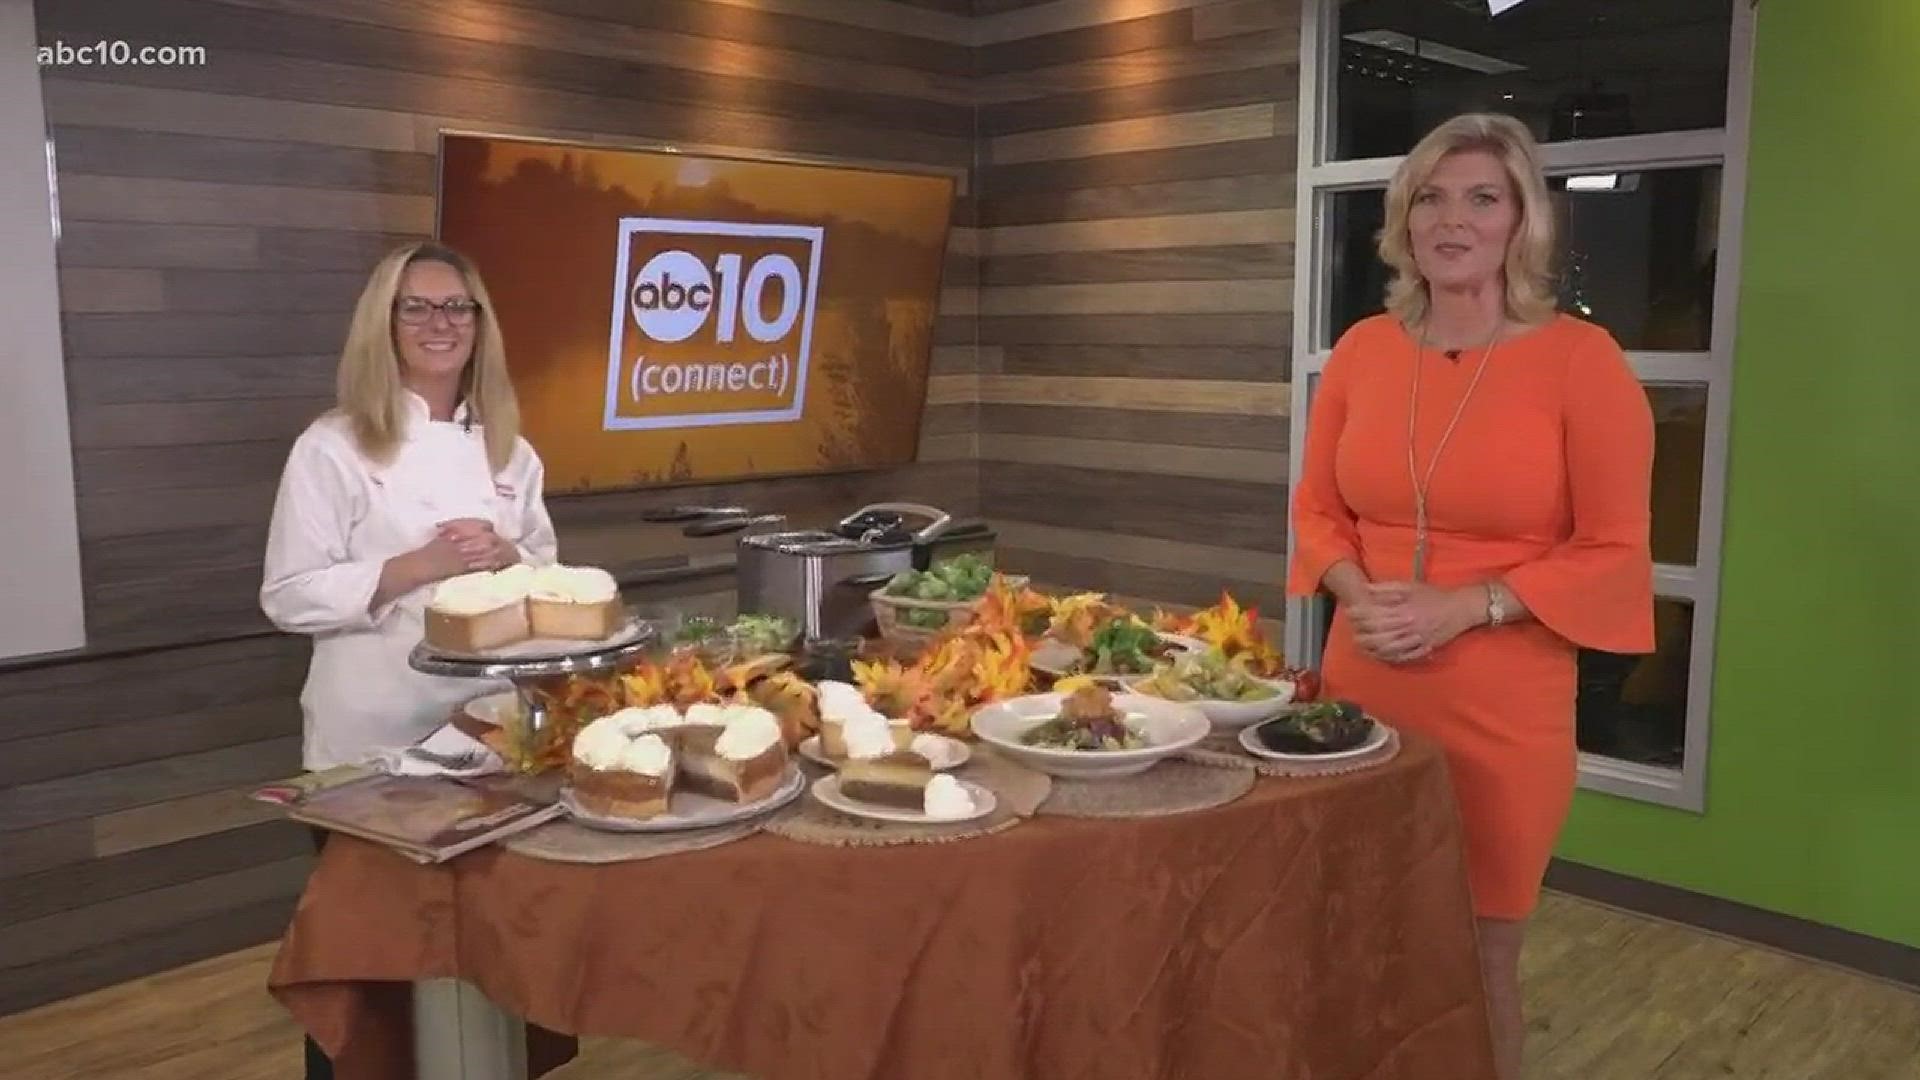 Paige Arnold, senior manager at The Cheesecake Factory in Roseville, shows how to make crispy Brussels sprouts, and talks about some new menu items the restaurant has rolled out for the fall.